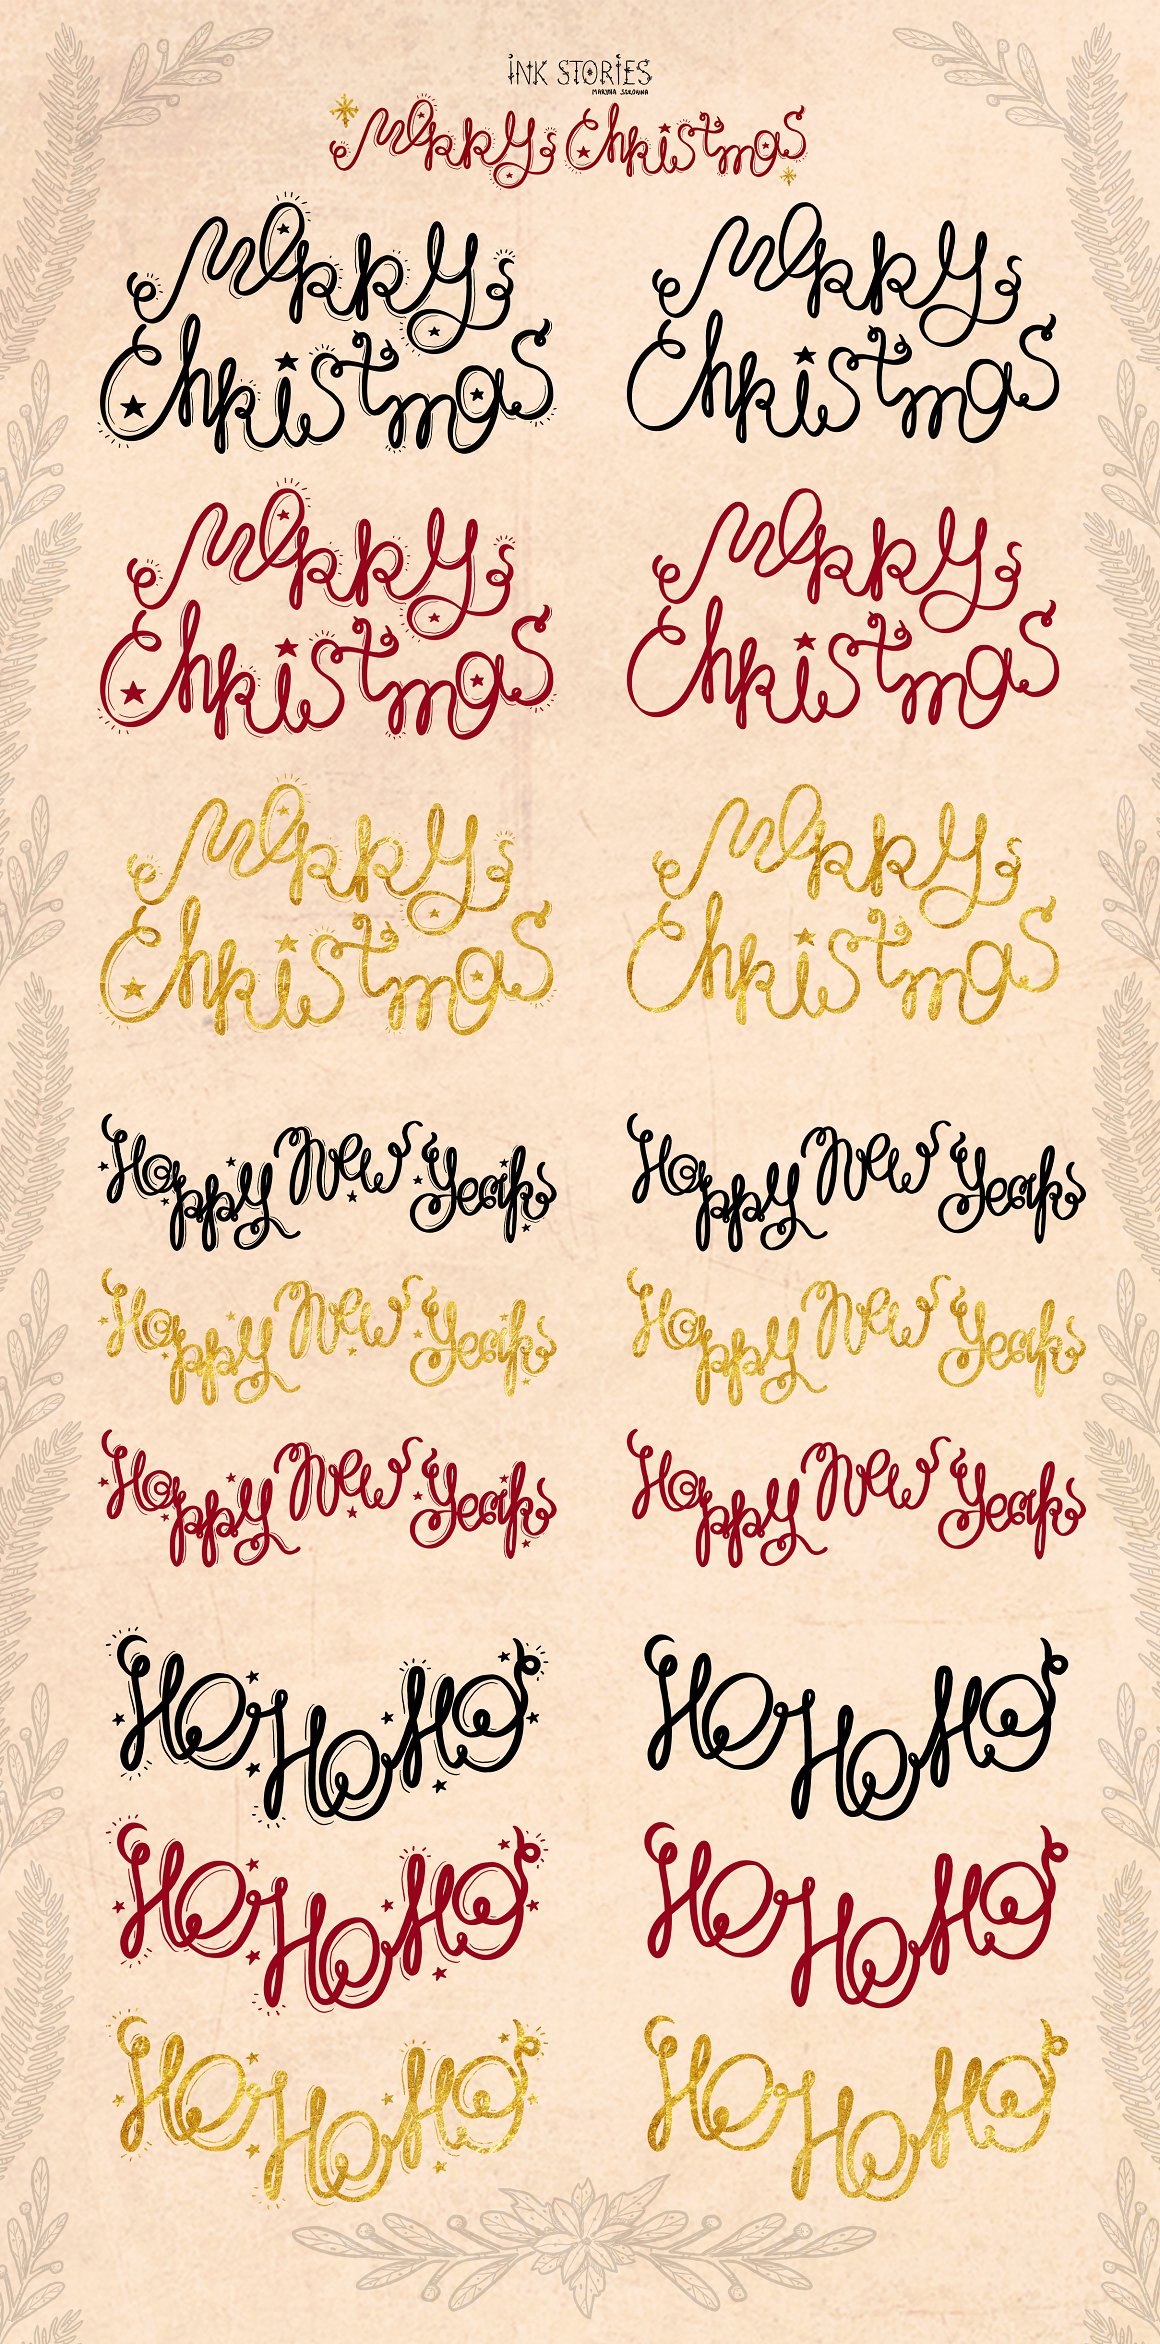 Black, red and golden lettering "Merry Christmas", "Happy New Year" and "HOHOHO".